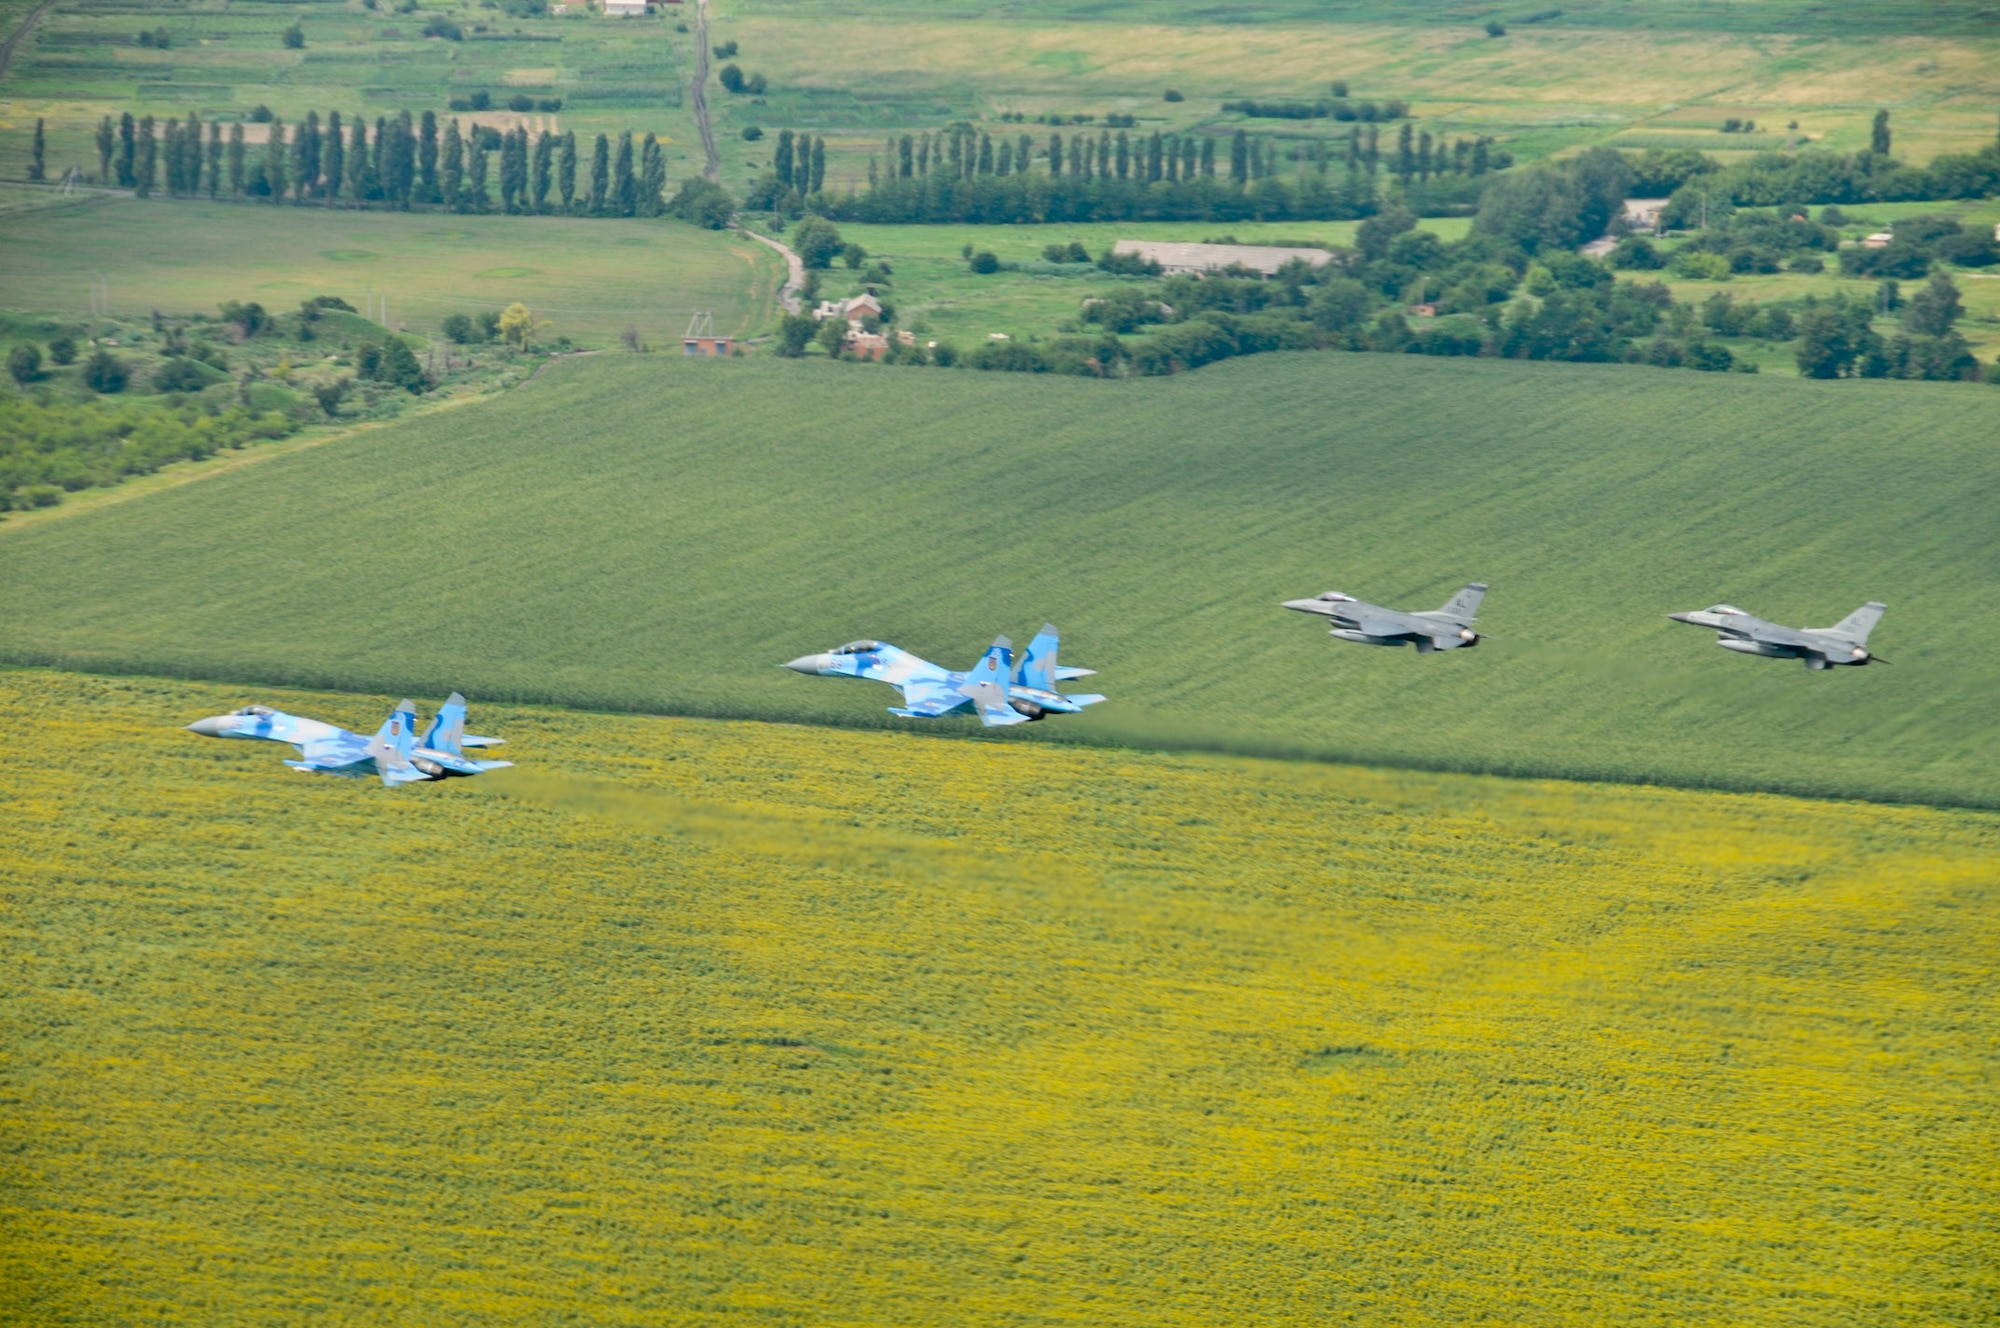 Ukraine SU-27s fly with Alabama Air National Guard F-16 Fighting Falcons over Ukranian sunflower fields during SAFE SKIES 2011.  SAFE SKIES 2011 is a military-to-military exchange between airmen from the U.S., Ukraine and Poland to enhance airspace security over the Ukraine and Poland in preparation for EURO 2012, the European soccer championship games. (U. S. Air Force photo/Tech. Sgt. Charles Vaughn)